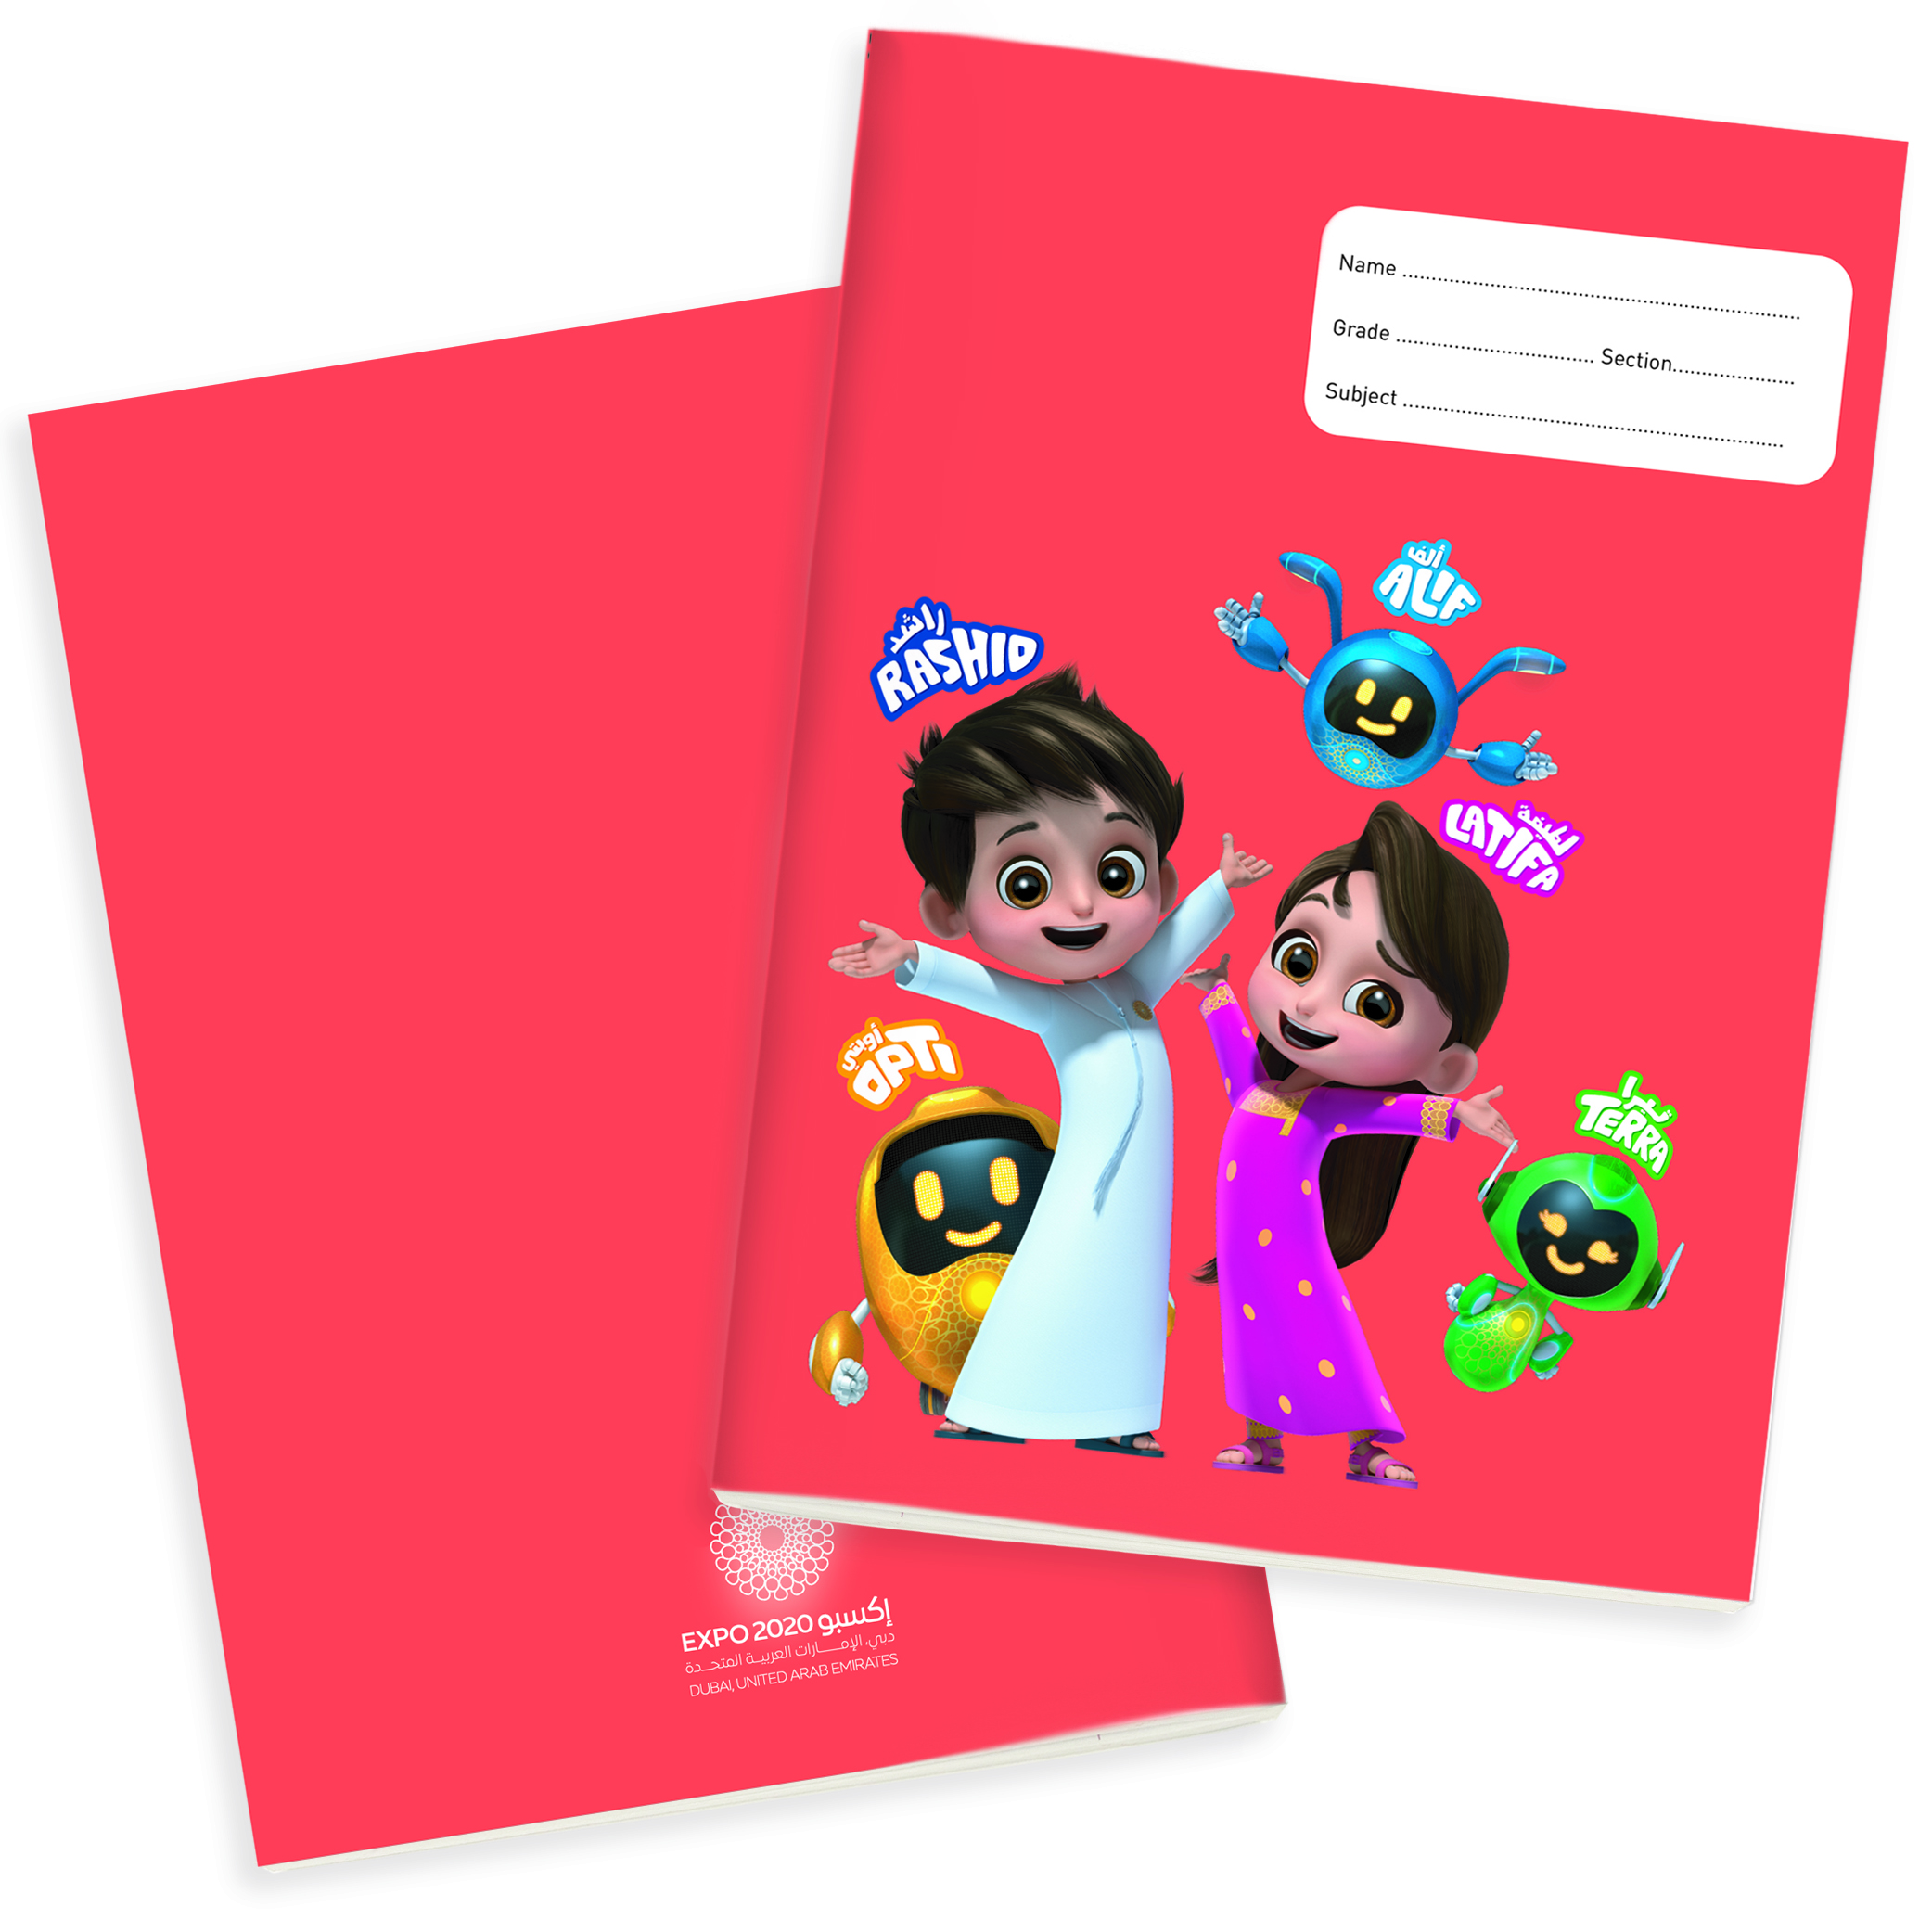 Expo 2020 Dubai Mascots A4 Exercise Books Pack of 4 - 160 Pages